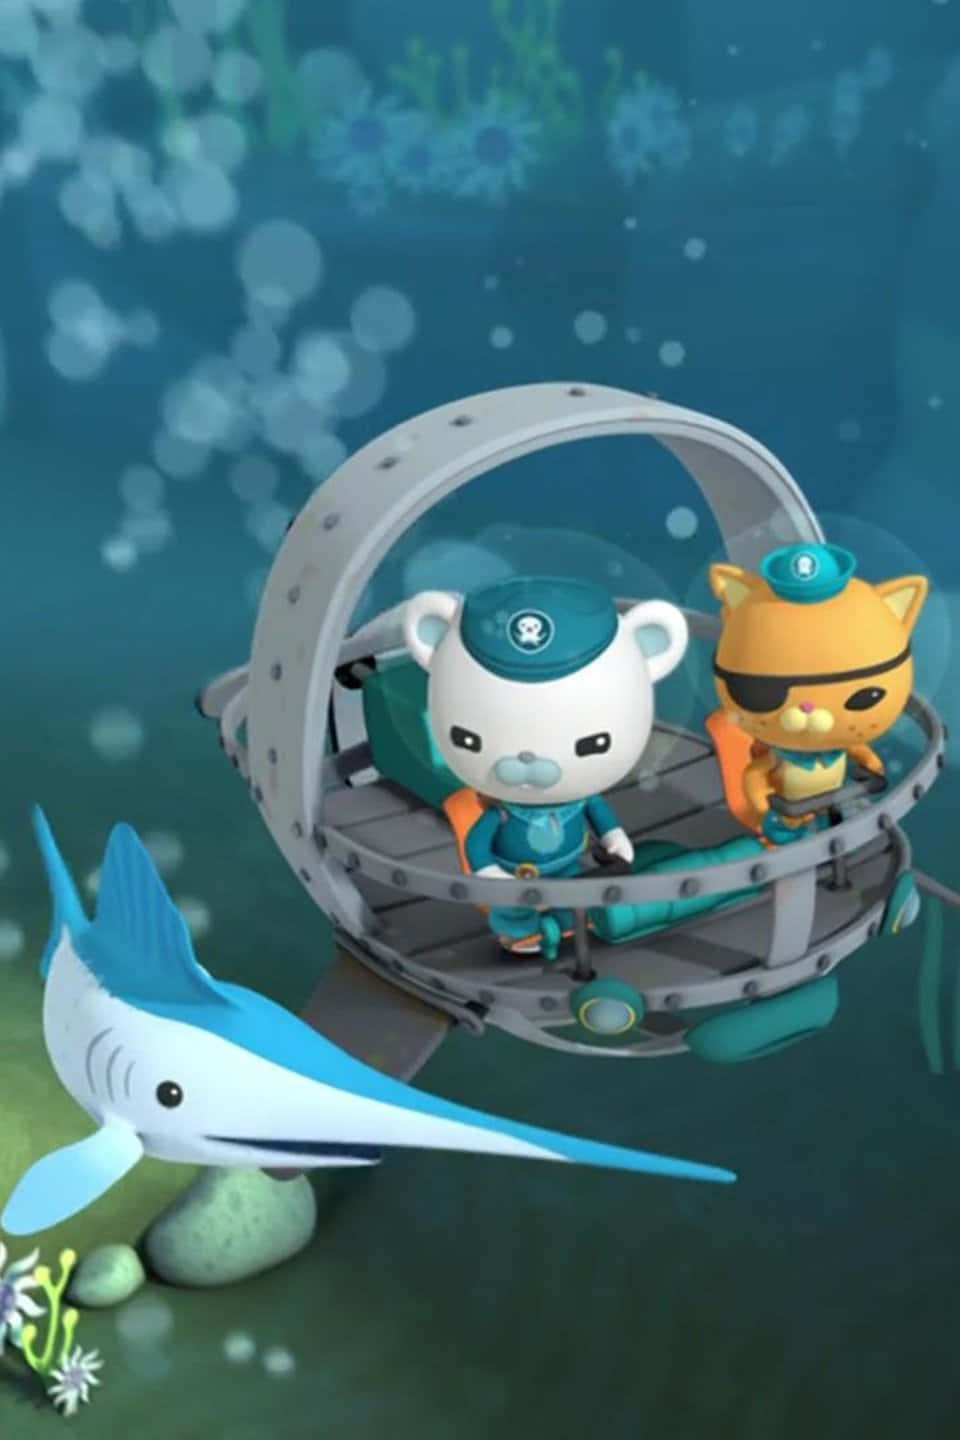 Exploring the undersea world with the Octonauts! Wallpaper